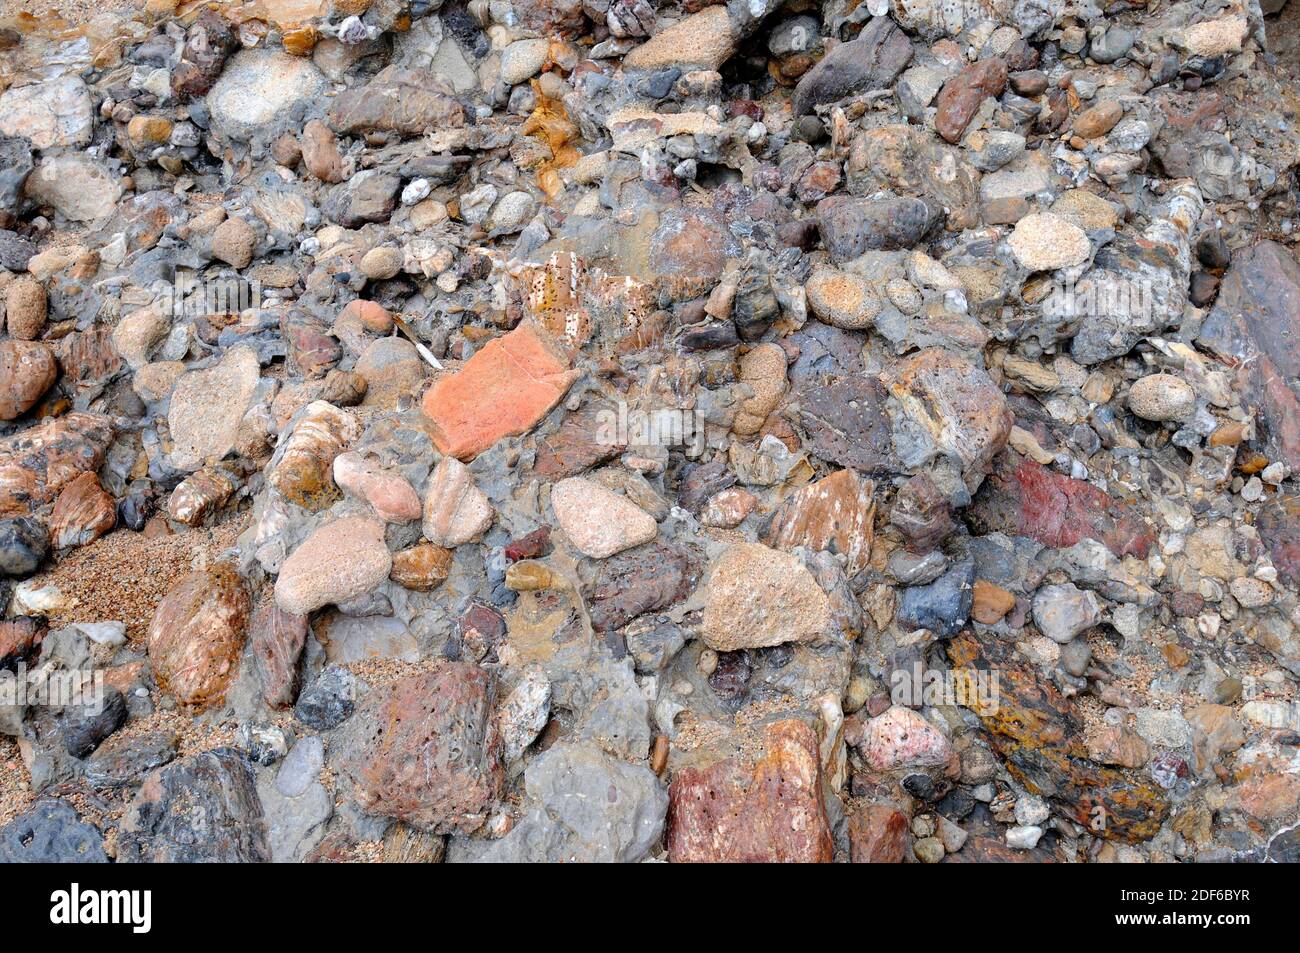 Conglomerate is a clastic sedimentary rock composed of rounded clasts (pudding stone). This sample comes from Pals, Girona, Catalonia, Spain. Stock Photo